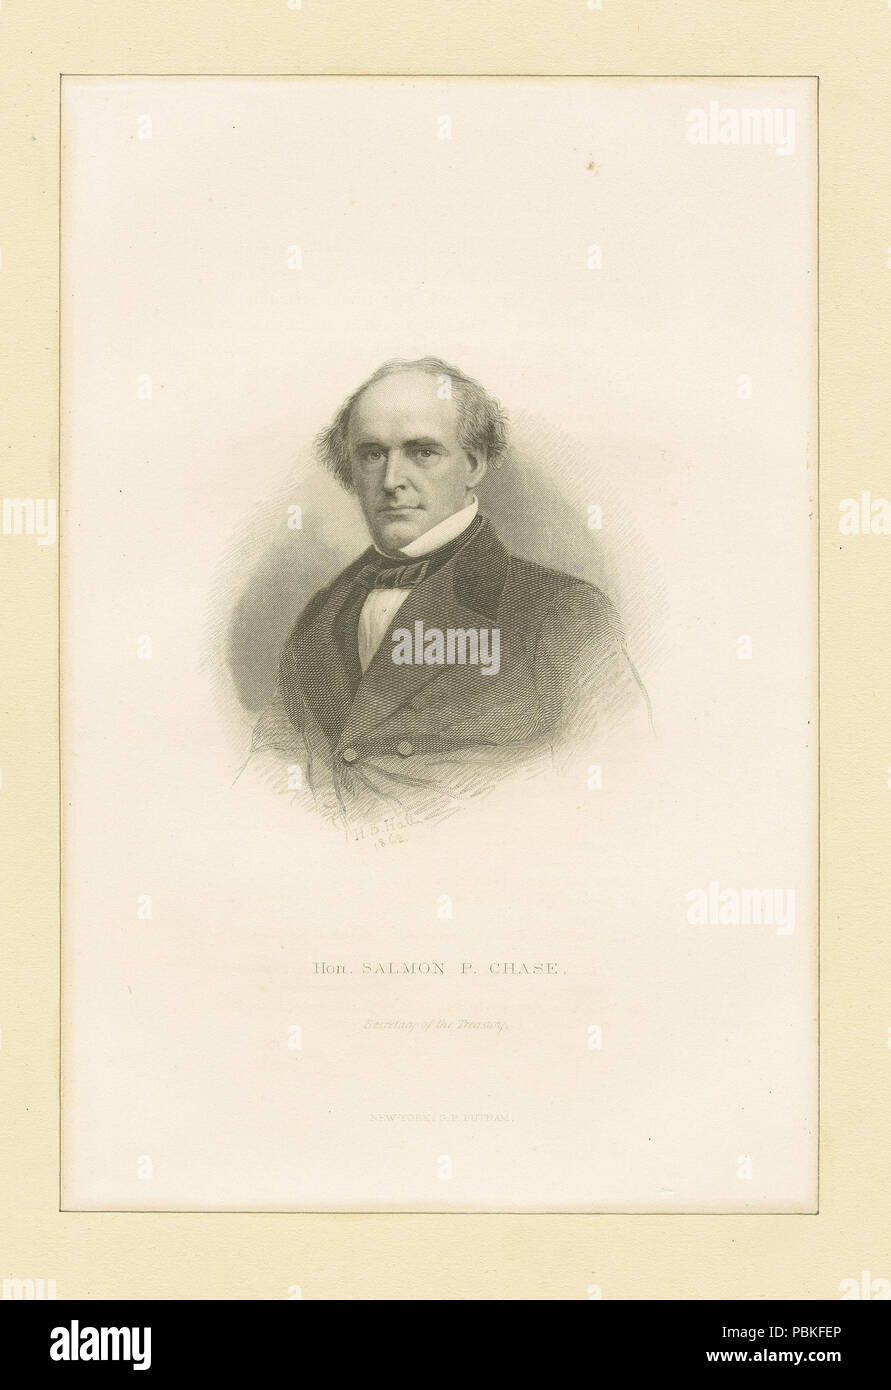 766 L'honorable Salmon P. Chase (NYPL b13476047-423289) Banque D'Images